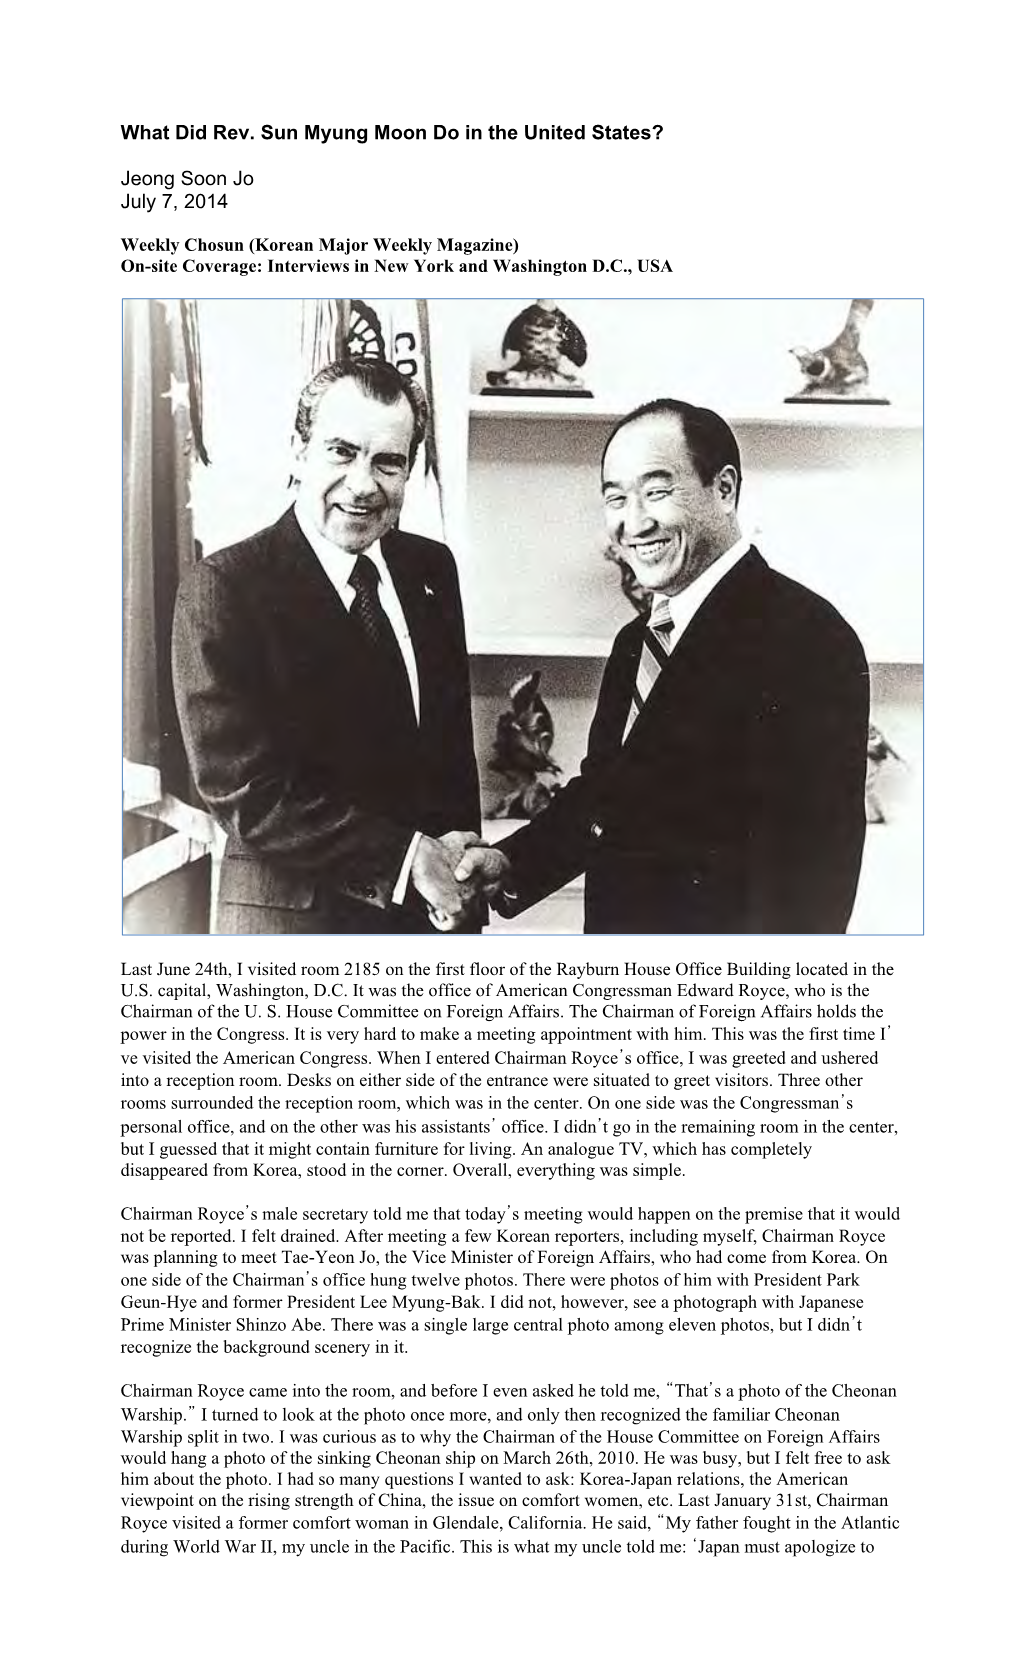 What Did Rev. Sun-Myung Moon Do in the United States?